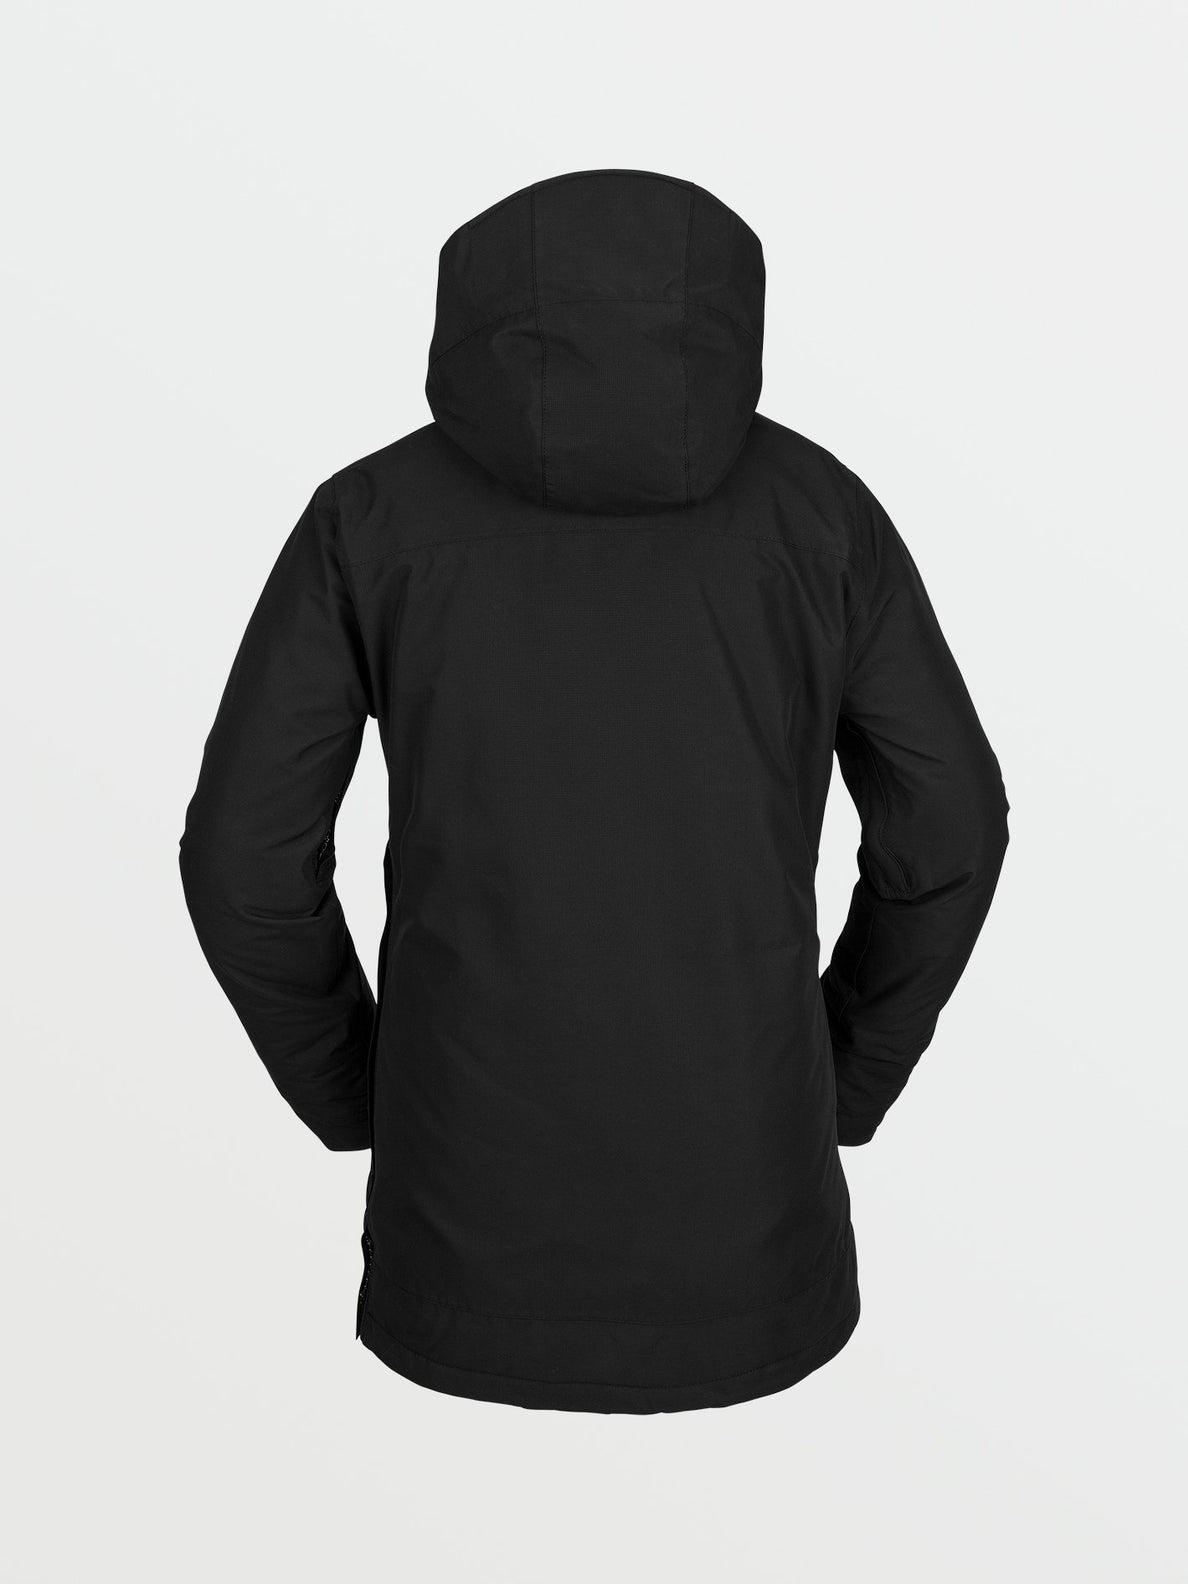 Fern Insulated Gore-Tex Pullover Jacket - BLACK (H0452204_BLK) [B]